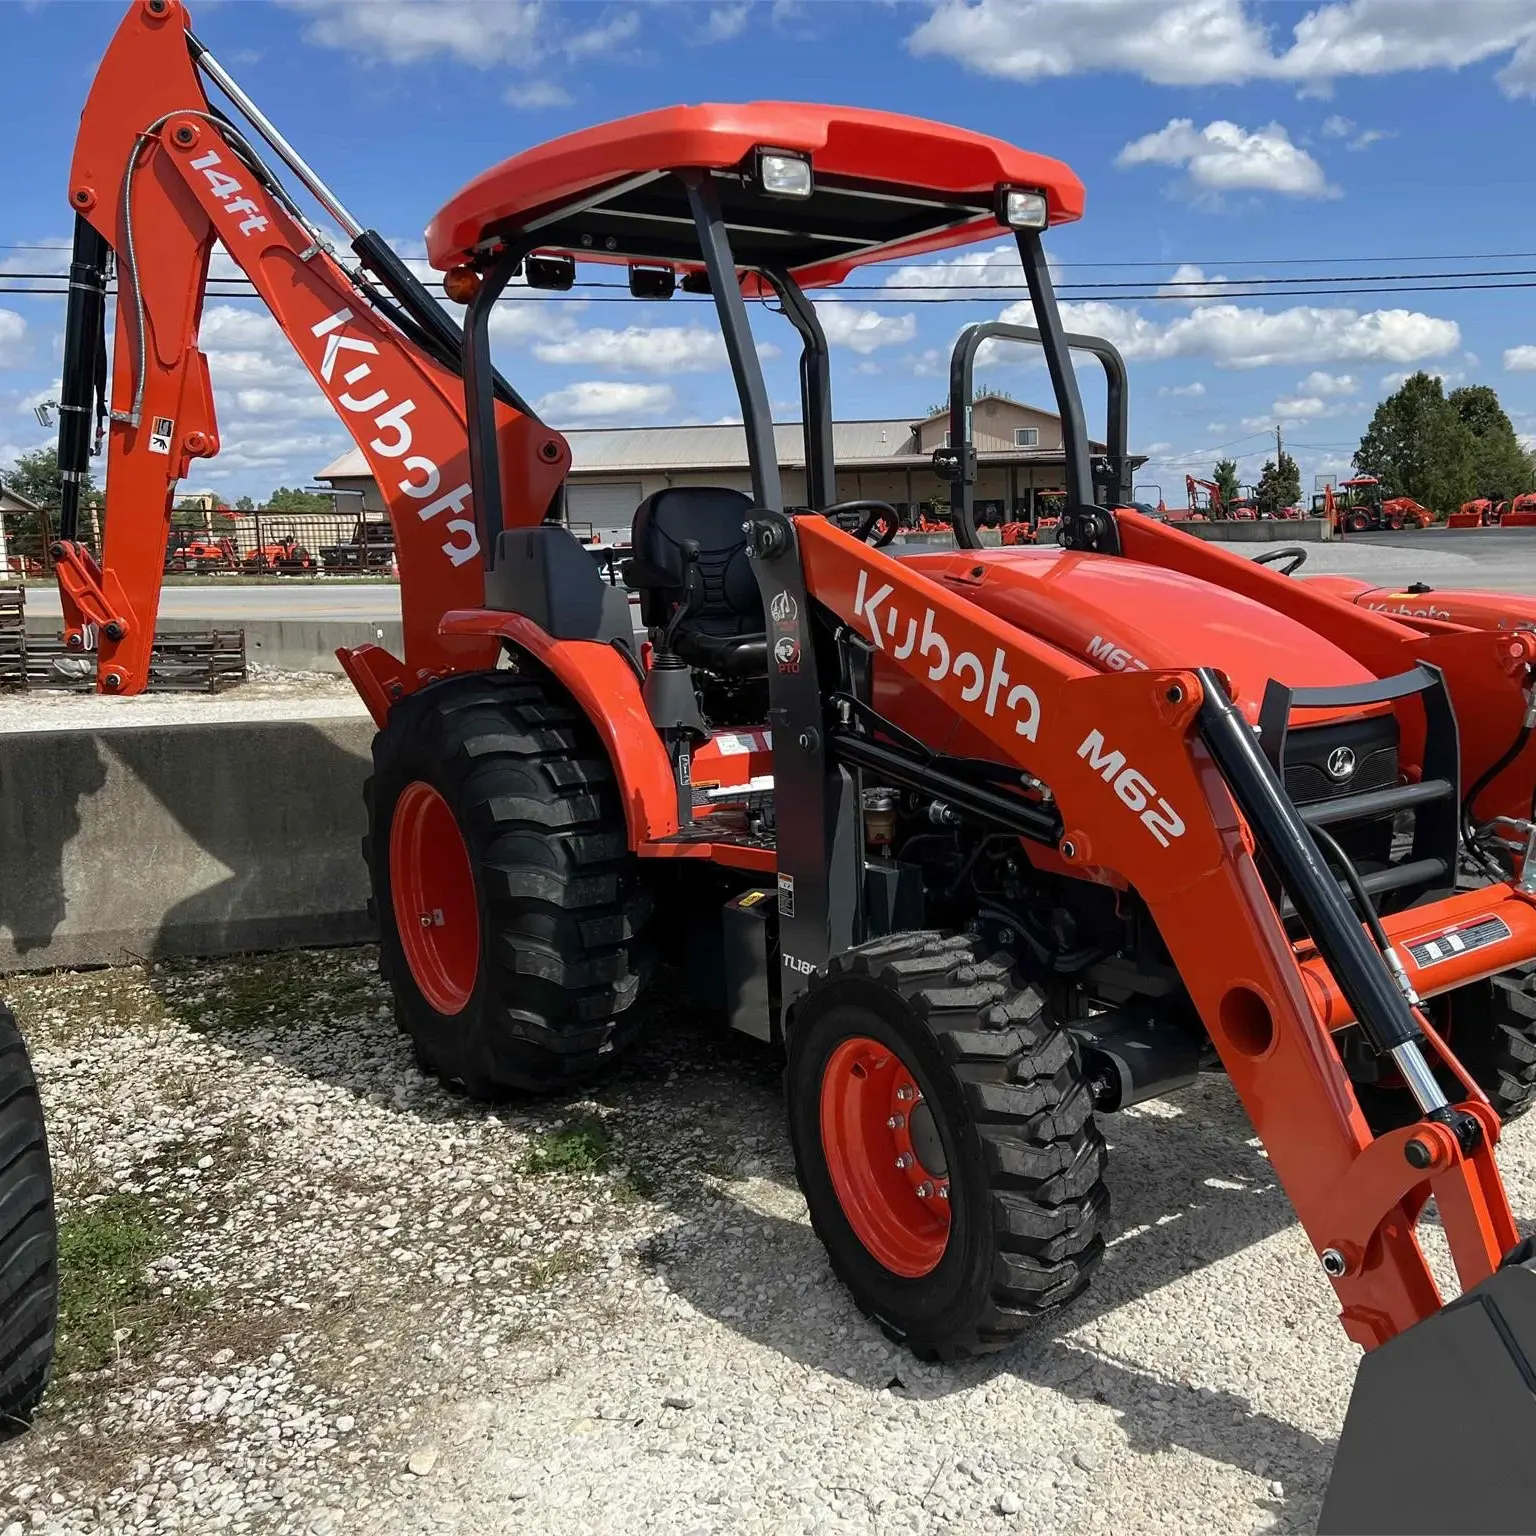 Hot selling KUBOTA M62 TLB front loader and BACKHOE attached complete kubota tractor